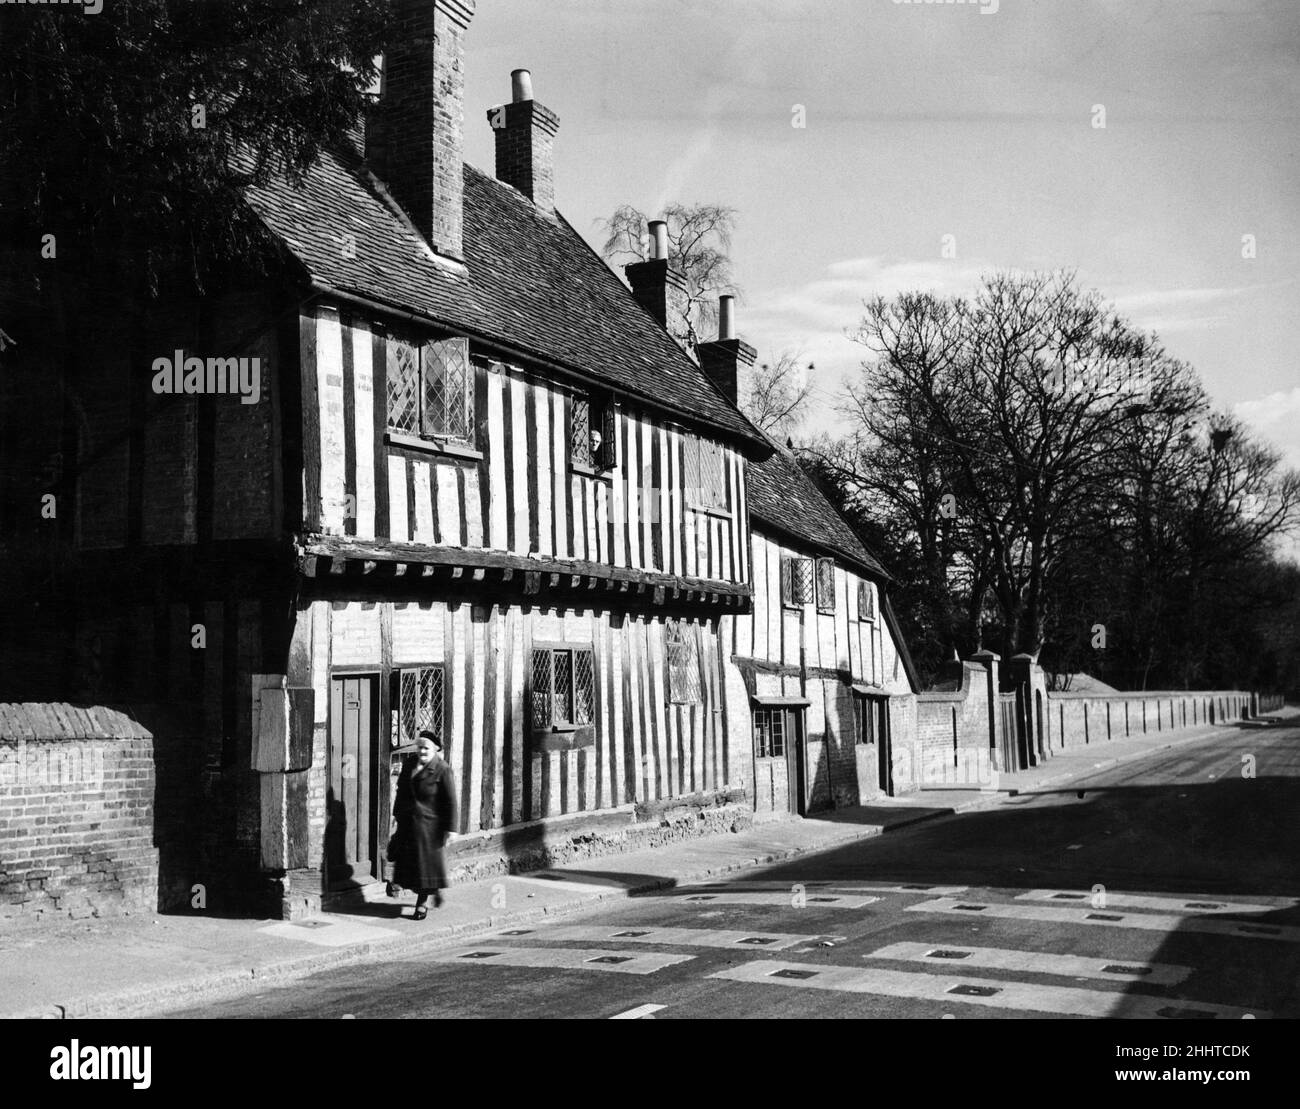 Church Cottages, Northchurch, Hertfordshire. it is believed these houses were once the rectory of St Mary's Church which is behind the cottages. 18th May 1943. Stock Photo